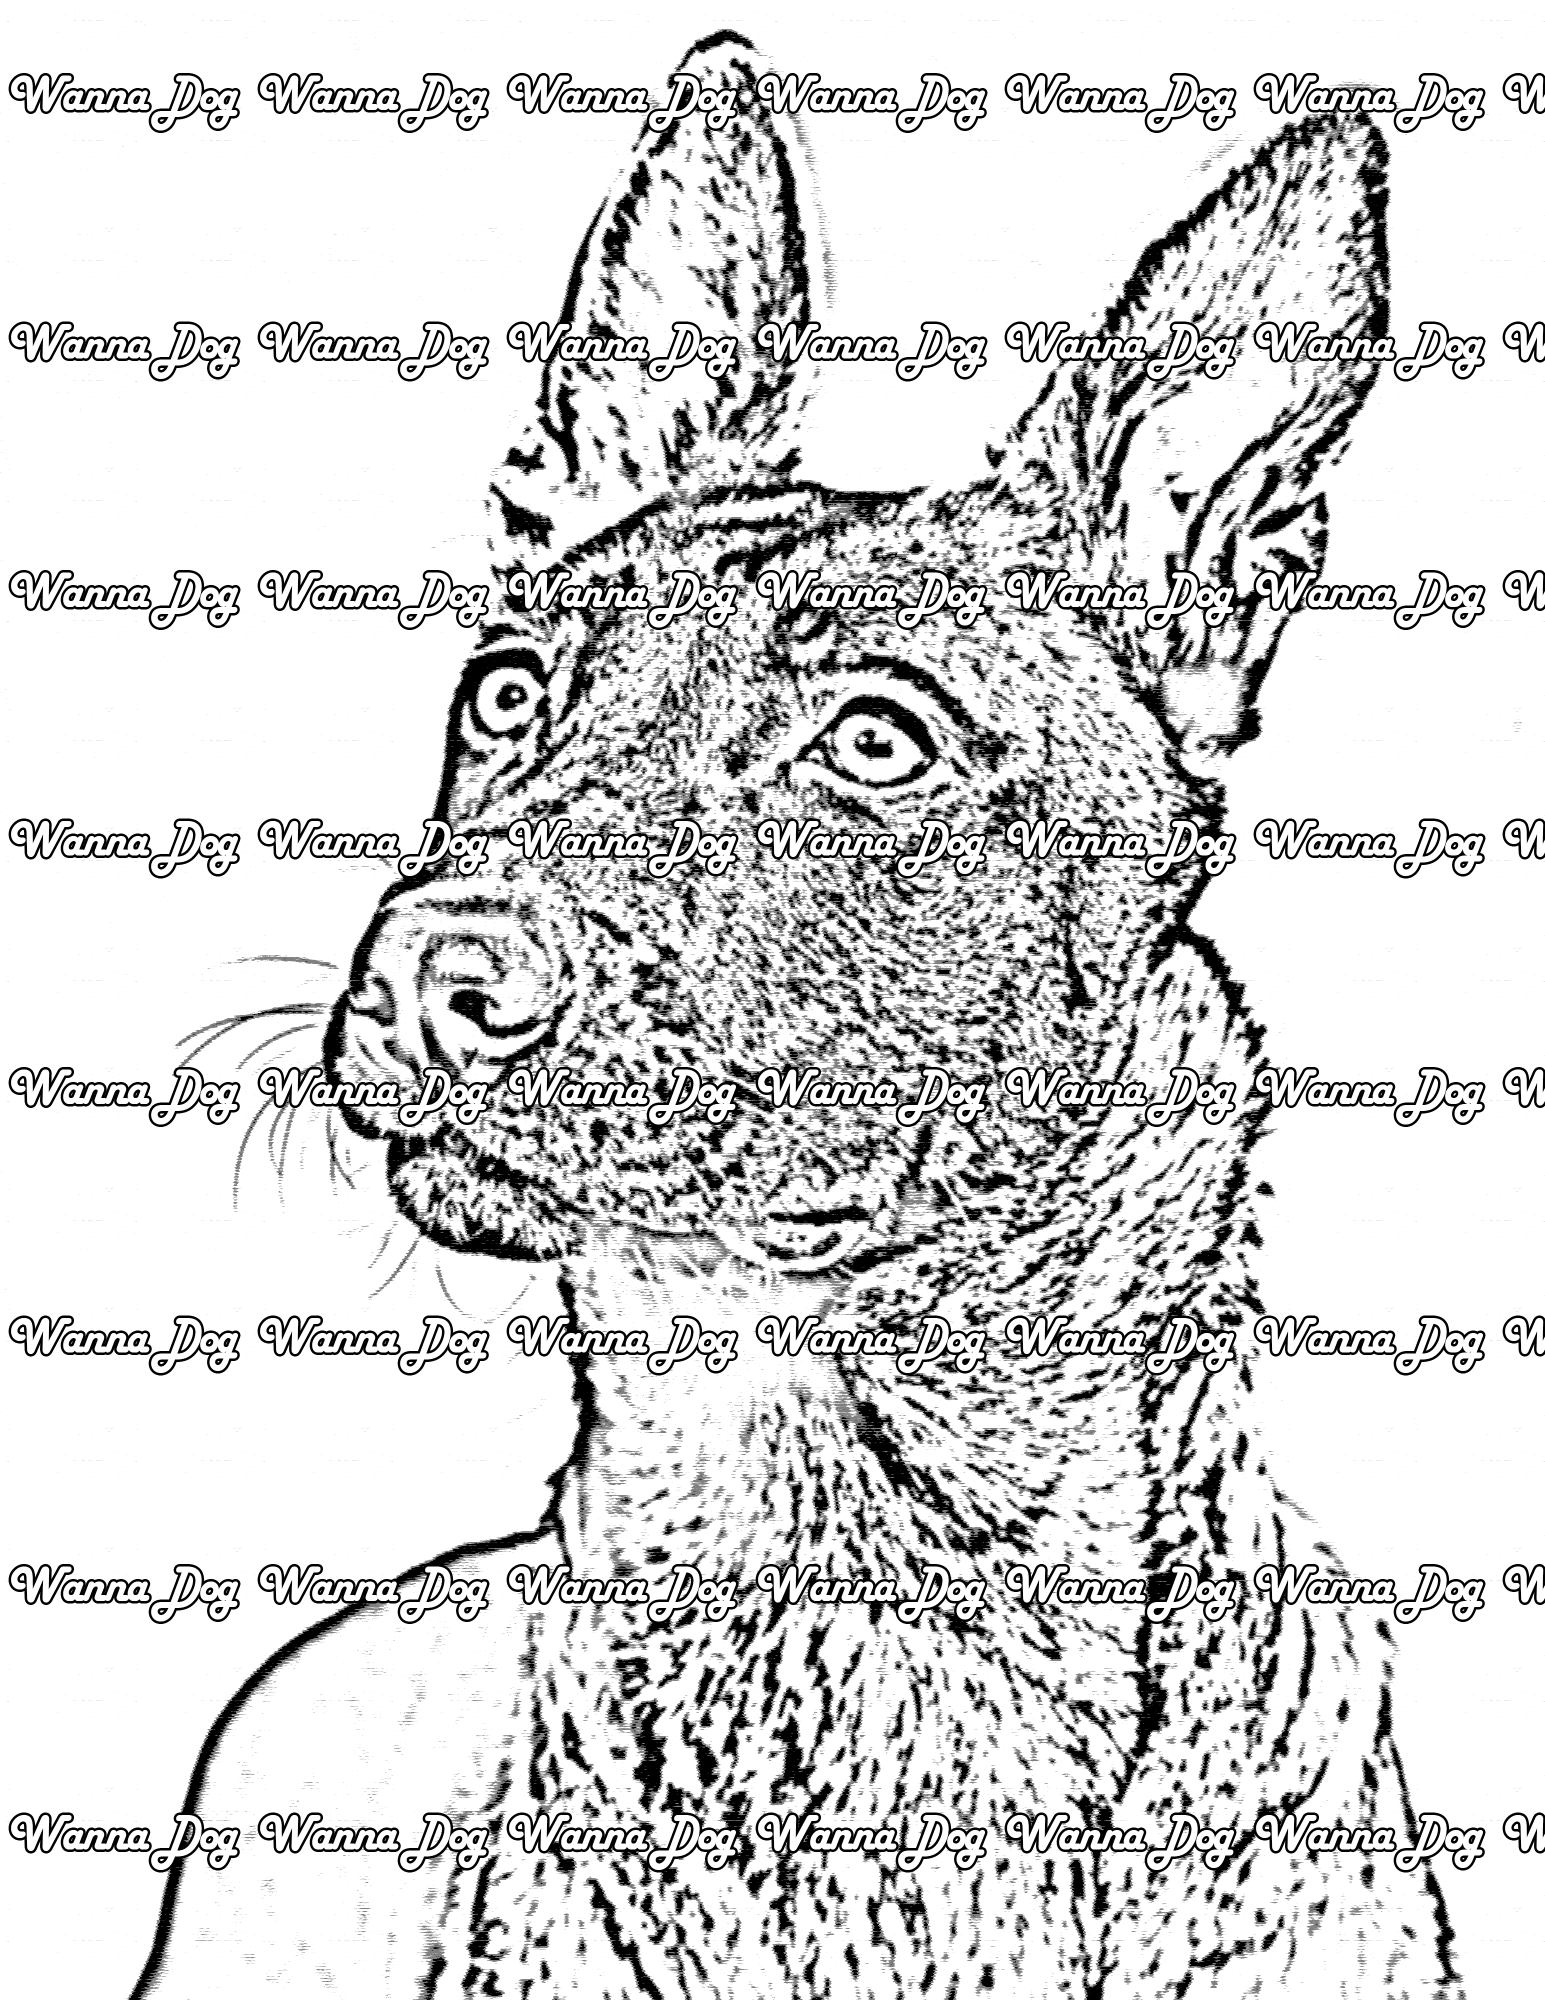 Belgian Malinois Coloring Page of a Belgian Malinois close up looking away from the camera